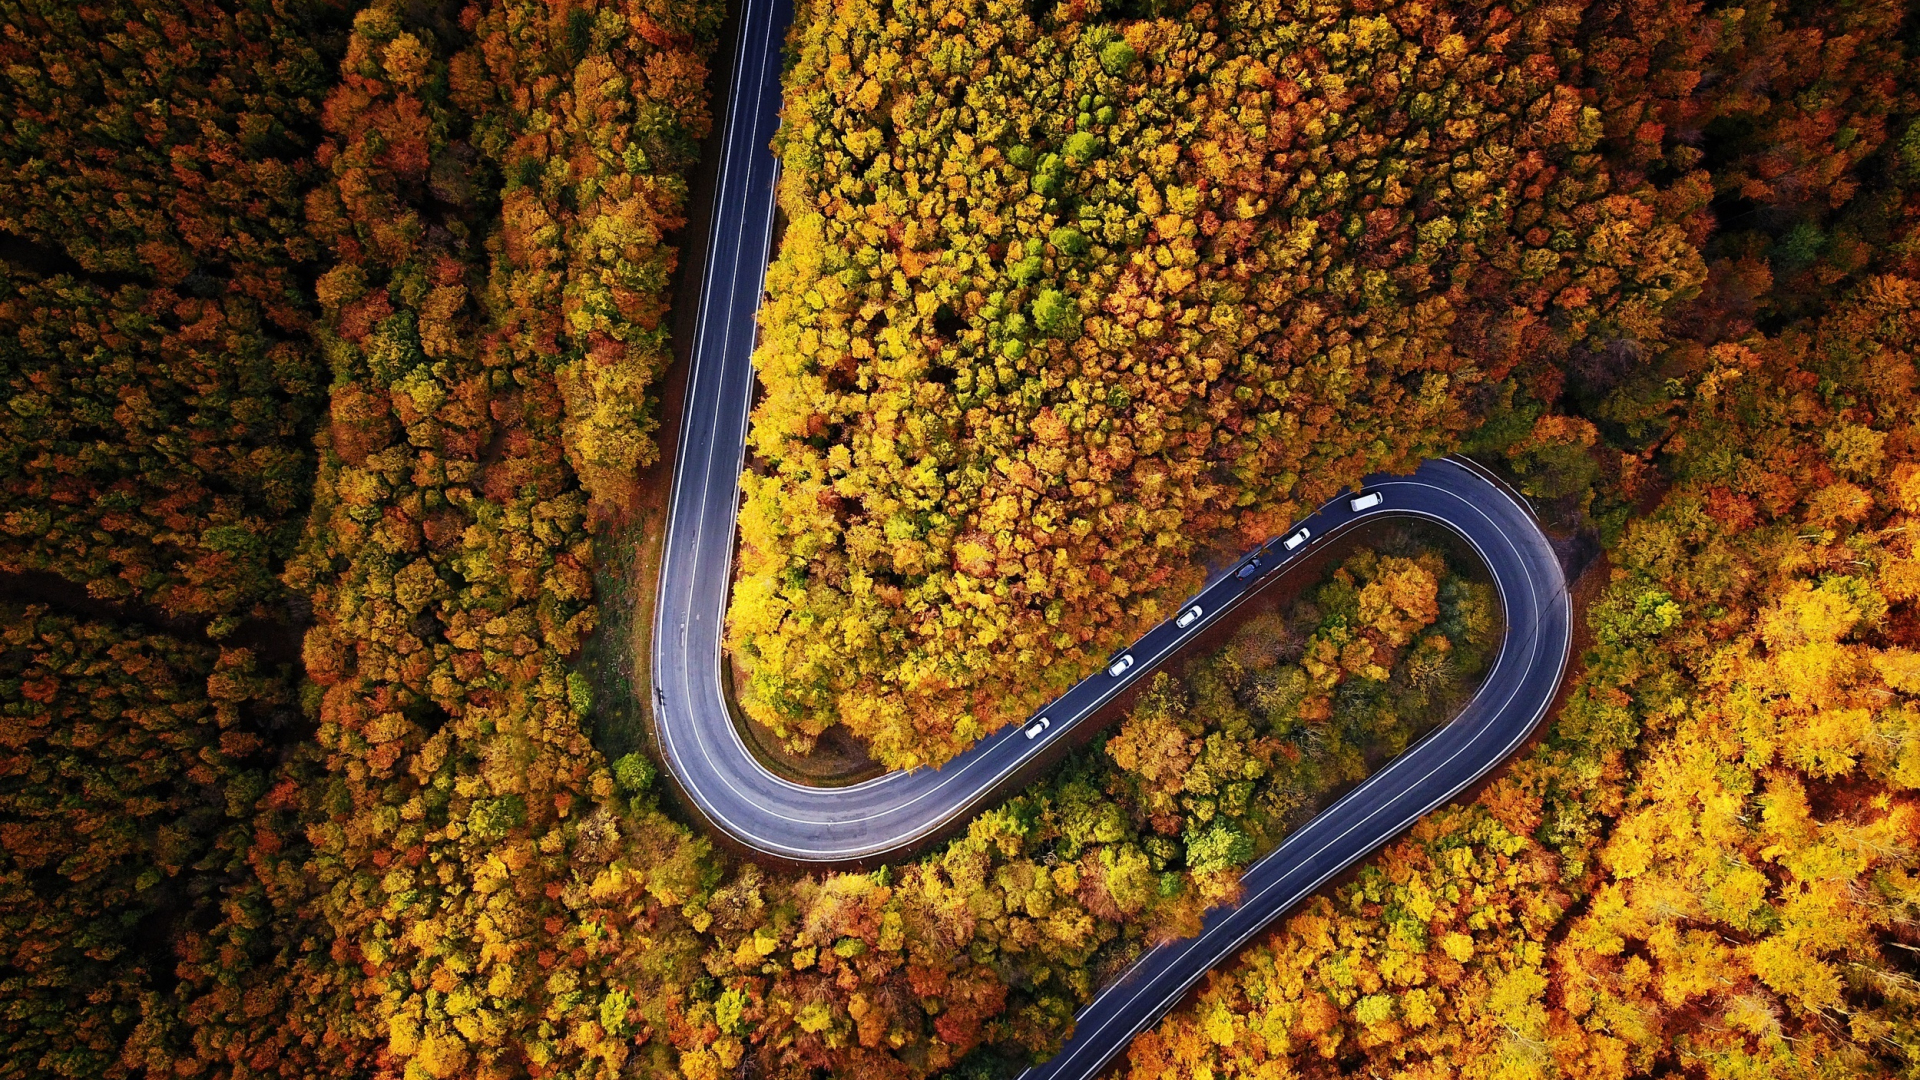 Download 1920x1080 wallpaper highway, turn, forest, autumn, aerial view, full hd, hdtv, fhd, 1080p, 1920x1080 HD image, background, 5973